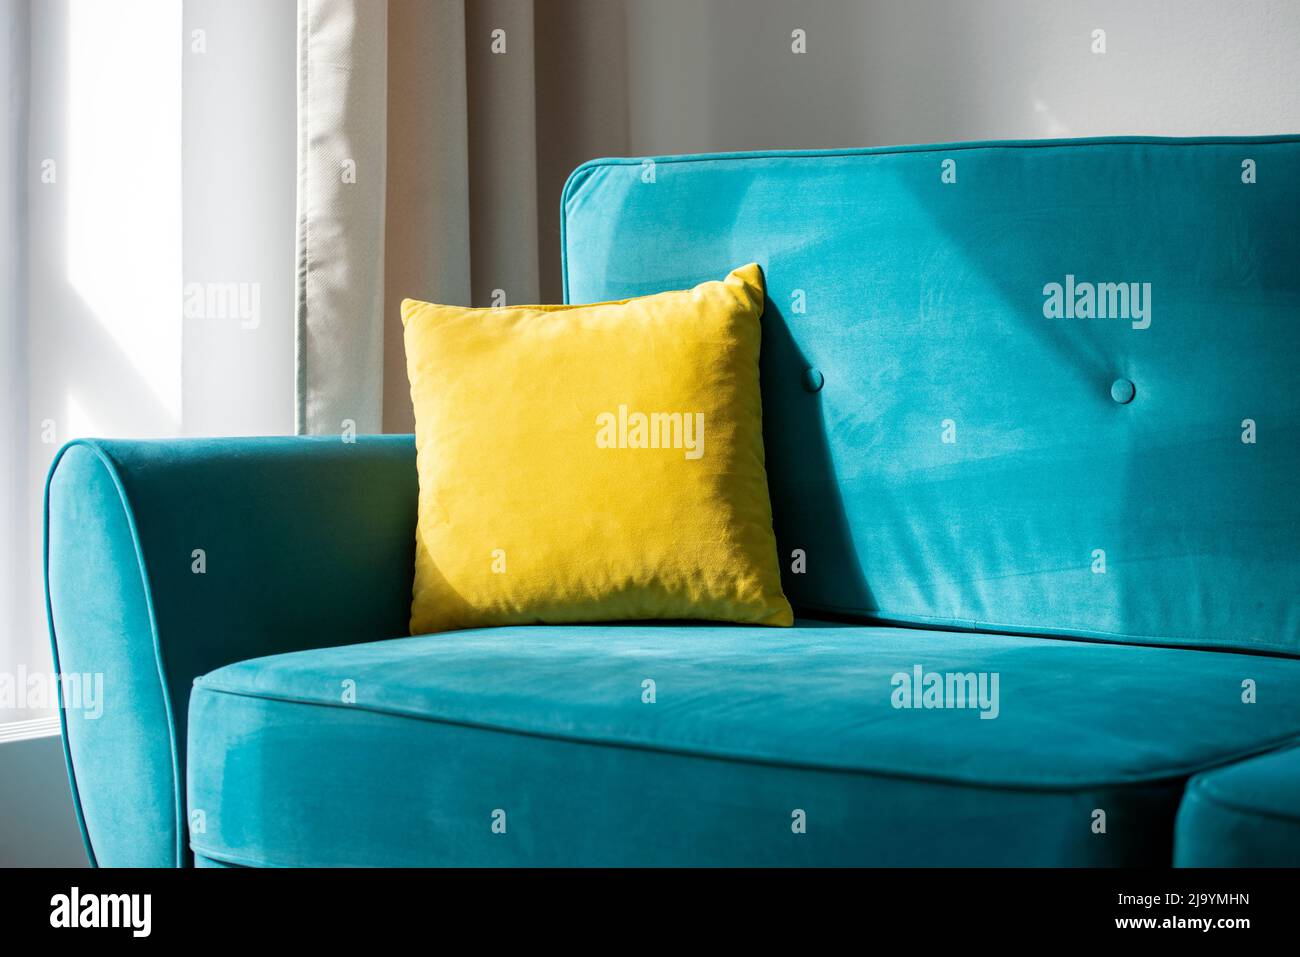 https://c8.alamy.com/comp/2J9YMHN/bright-yellow-pillow-on-blue-turquoise-sofa-or-couch-interior-of-the-comfortable-residential-room-2J9YMHN.jpg